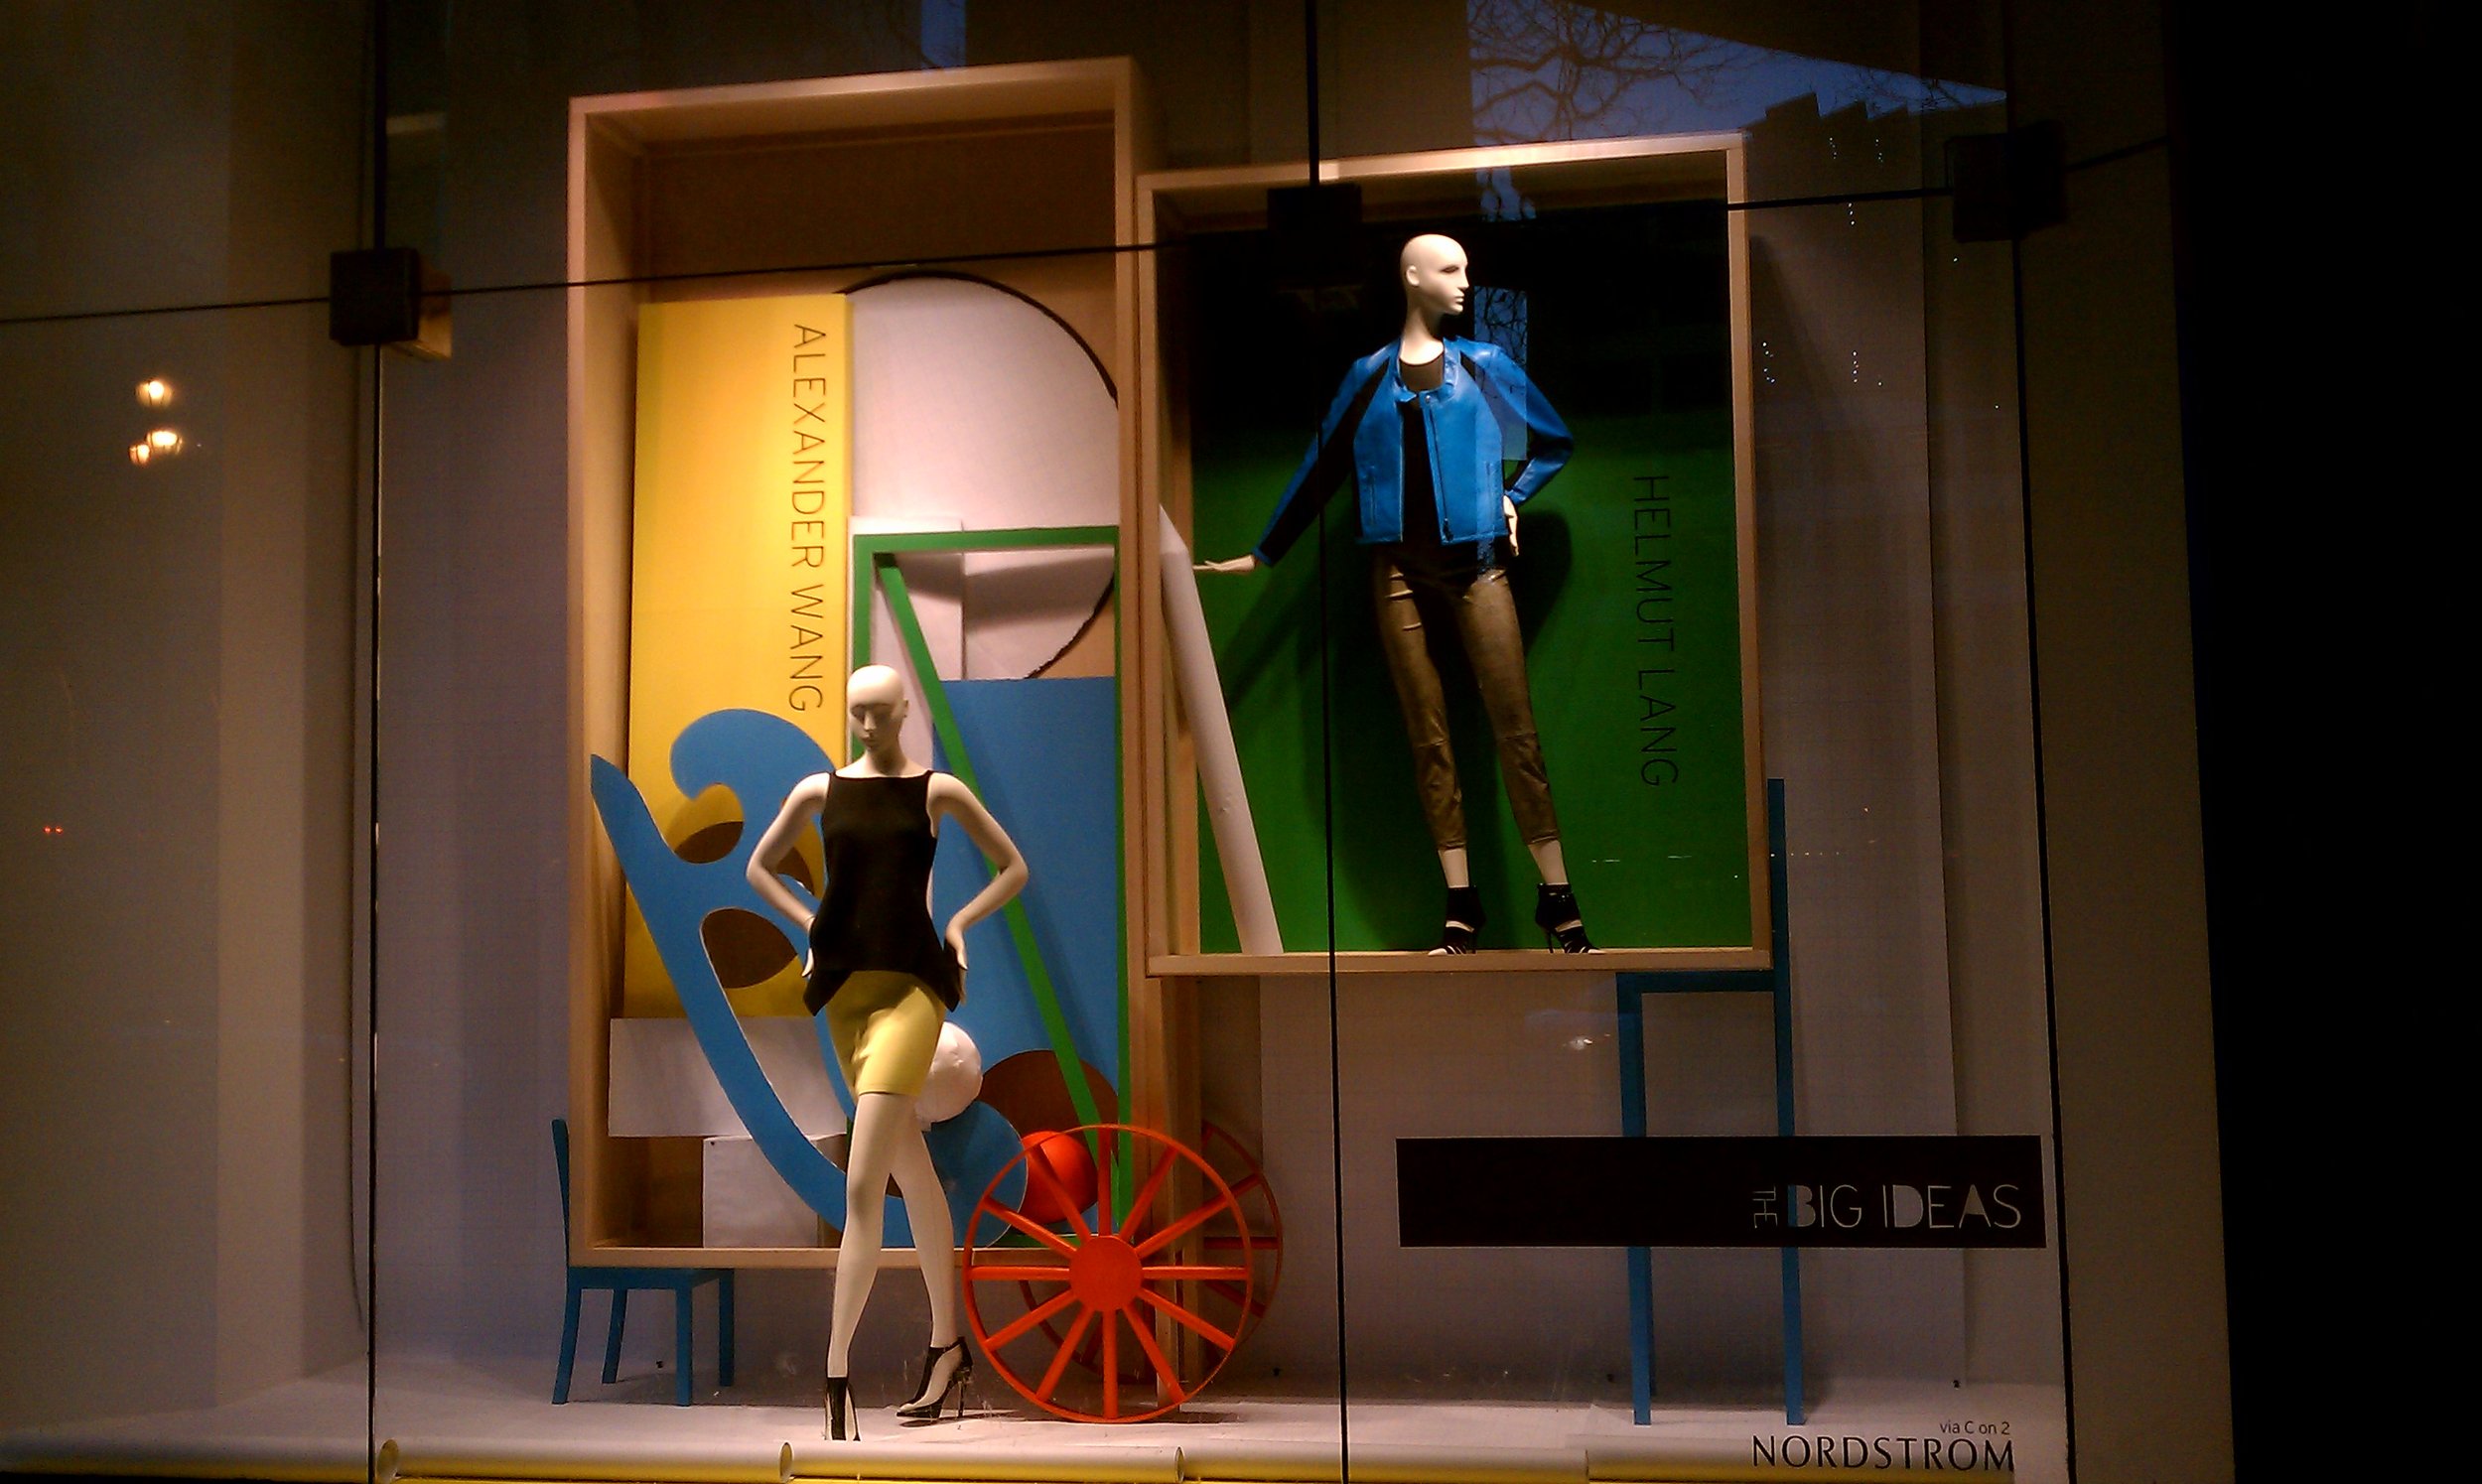 centdegrés Invents a New Visual Merchandising Experience for